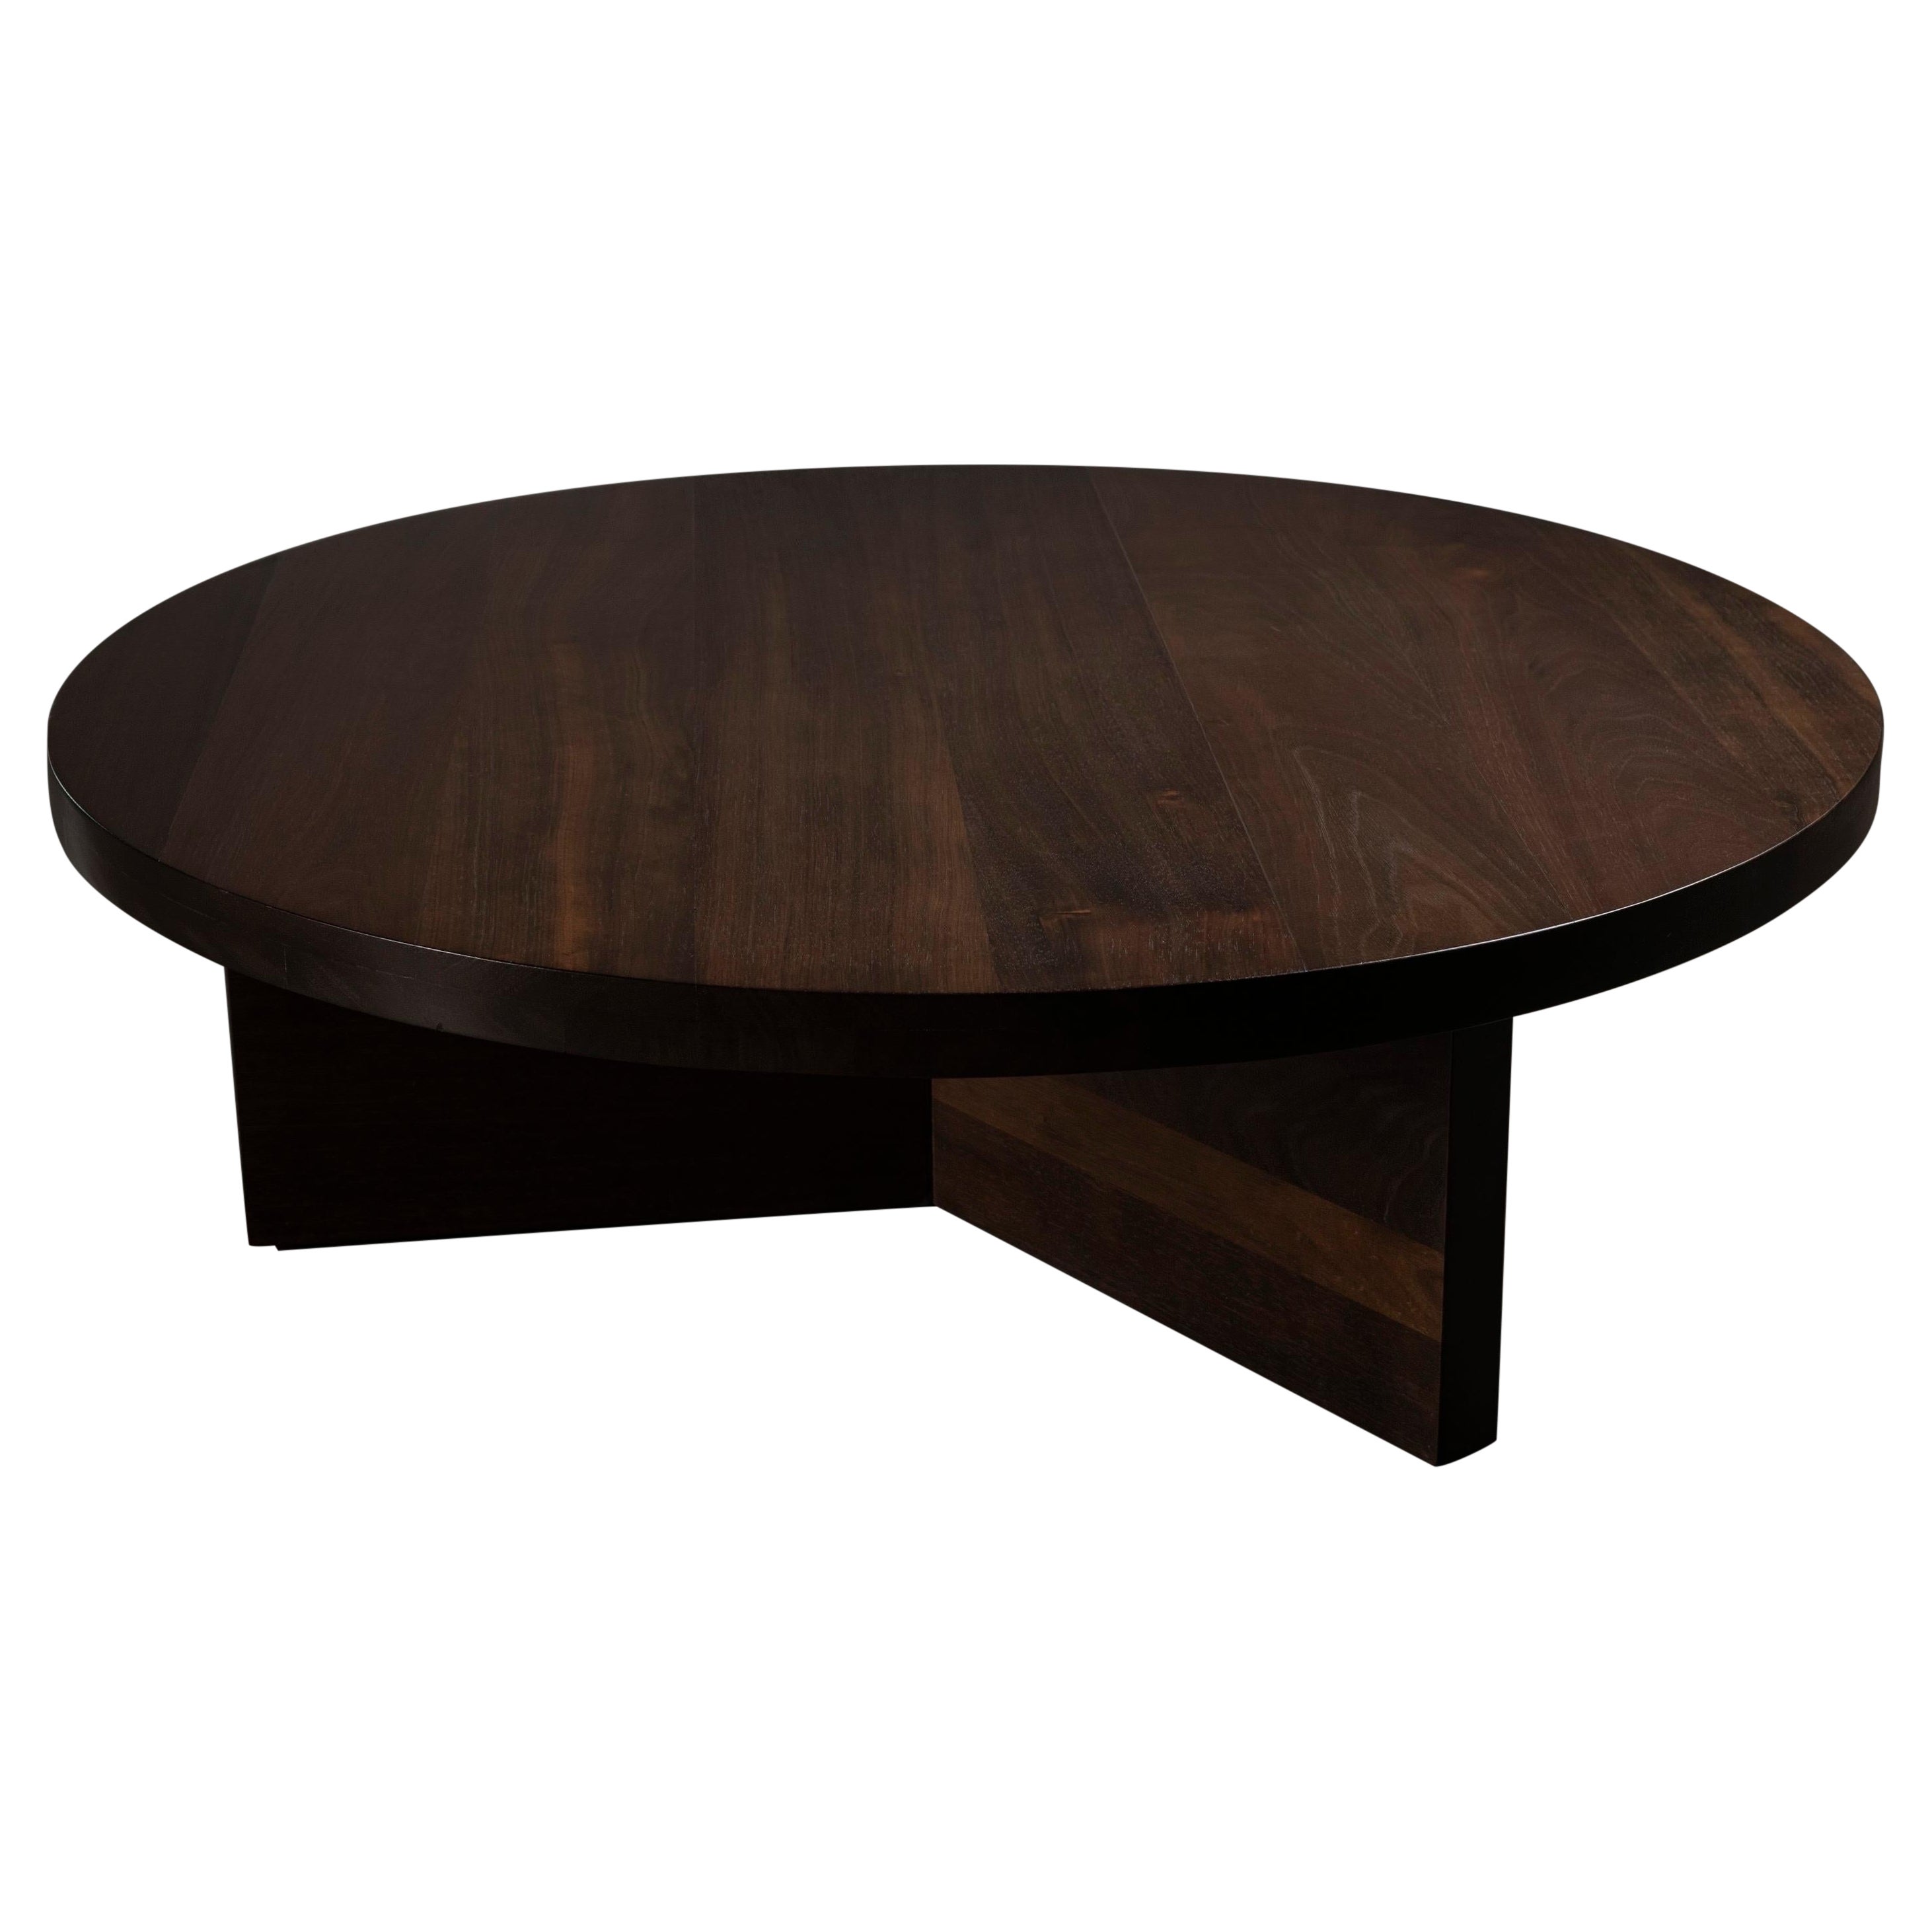 Round Walnut Finish Coffee Table For Sale